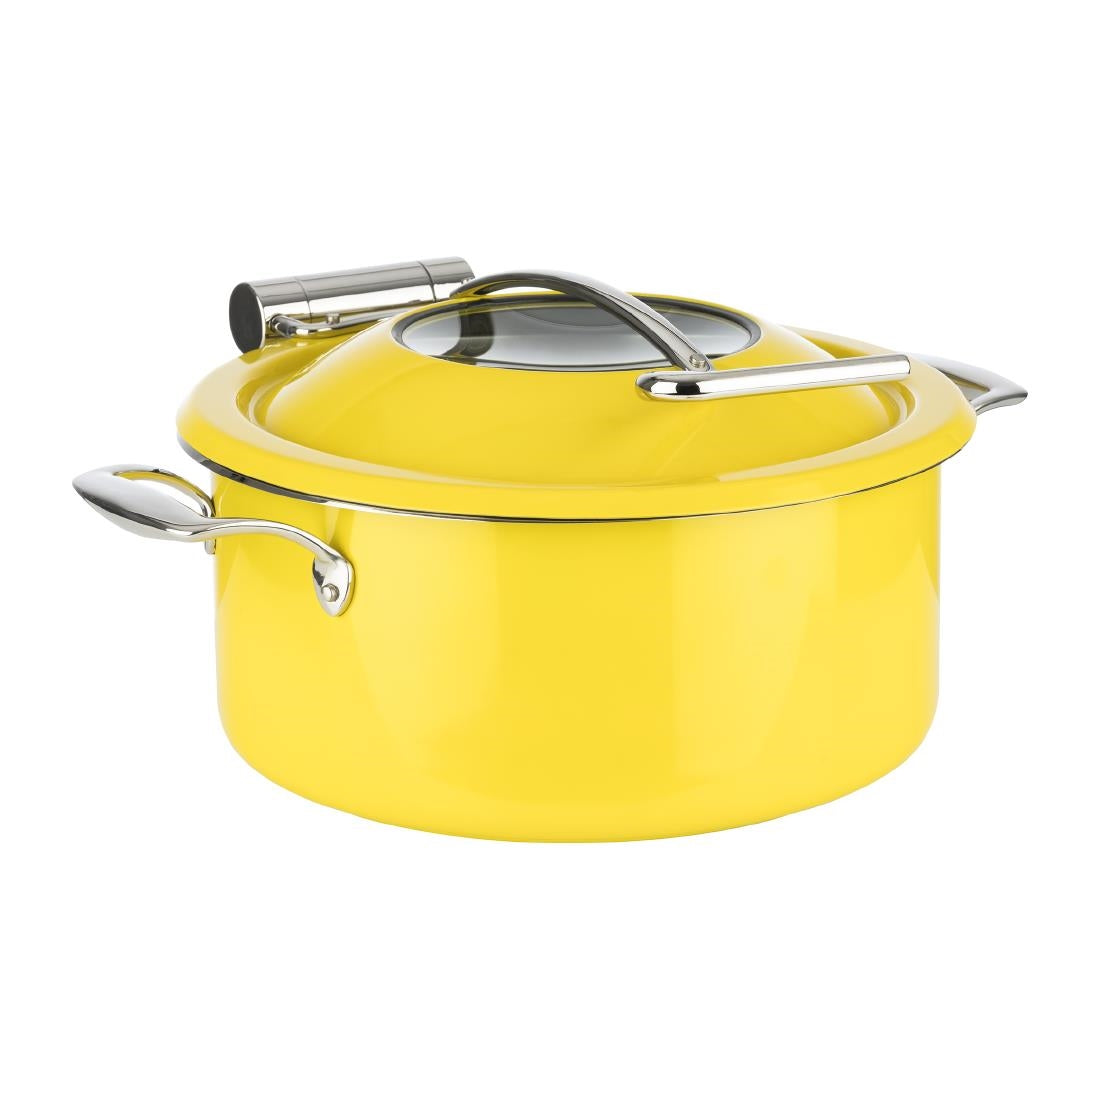 FT168 APS Chafing Dish Set Yellow 305mm JD Catering Equipment Solutions Ltd